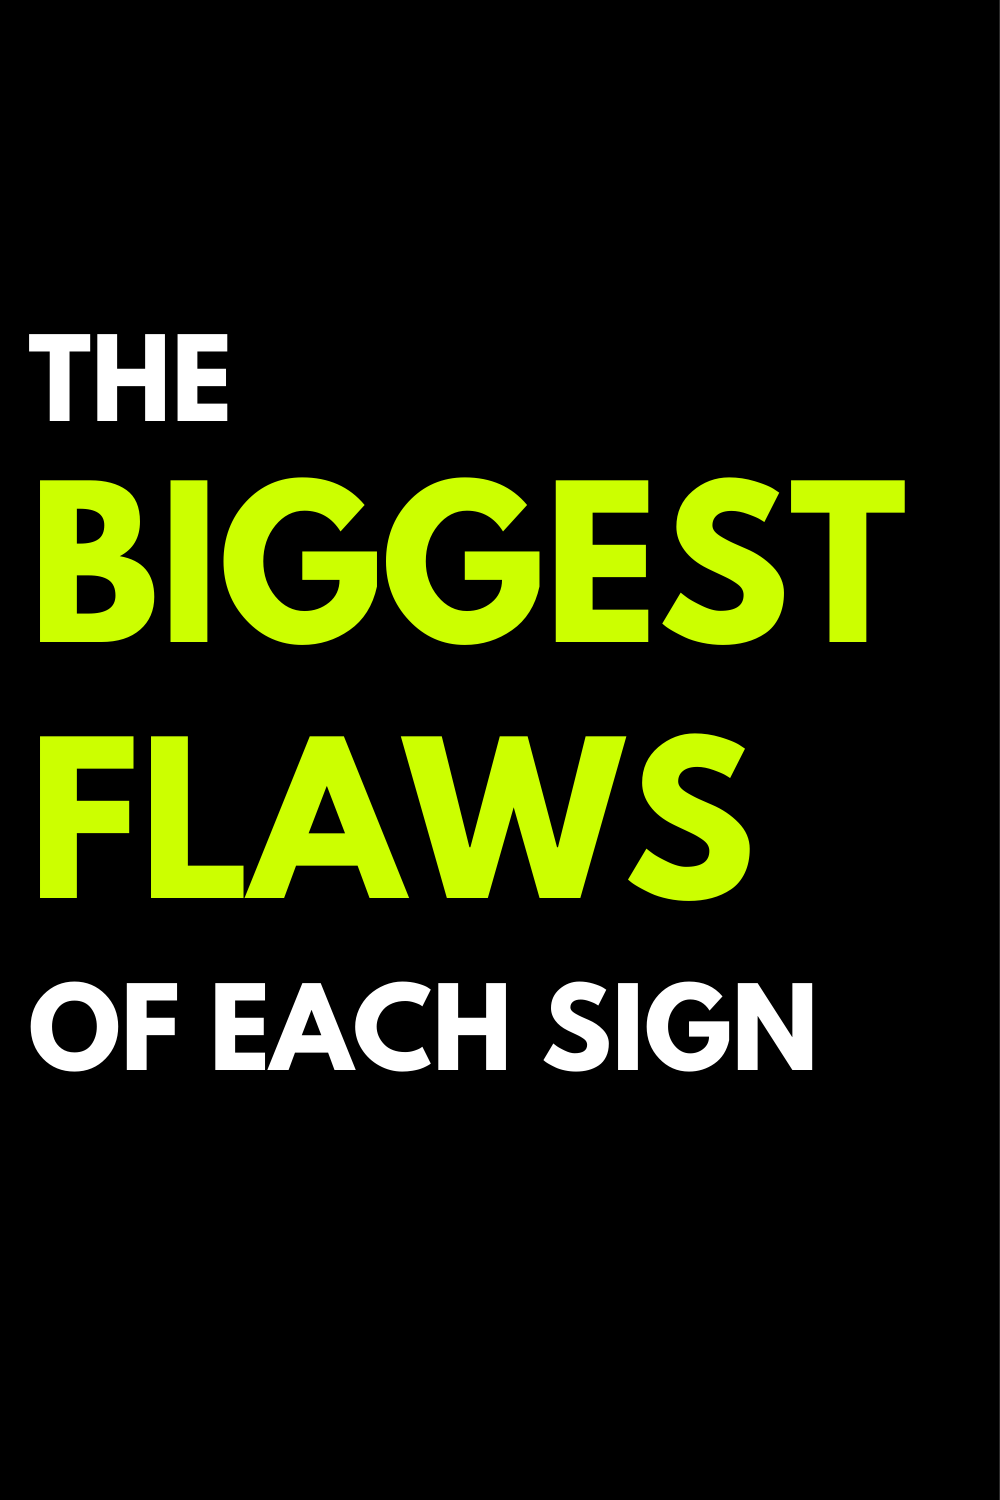 The biggest flaws of each sign